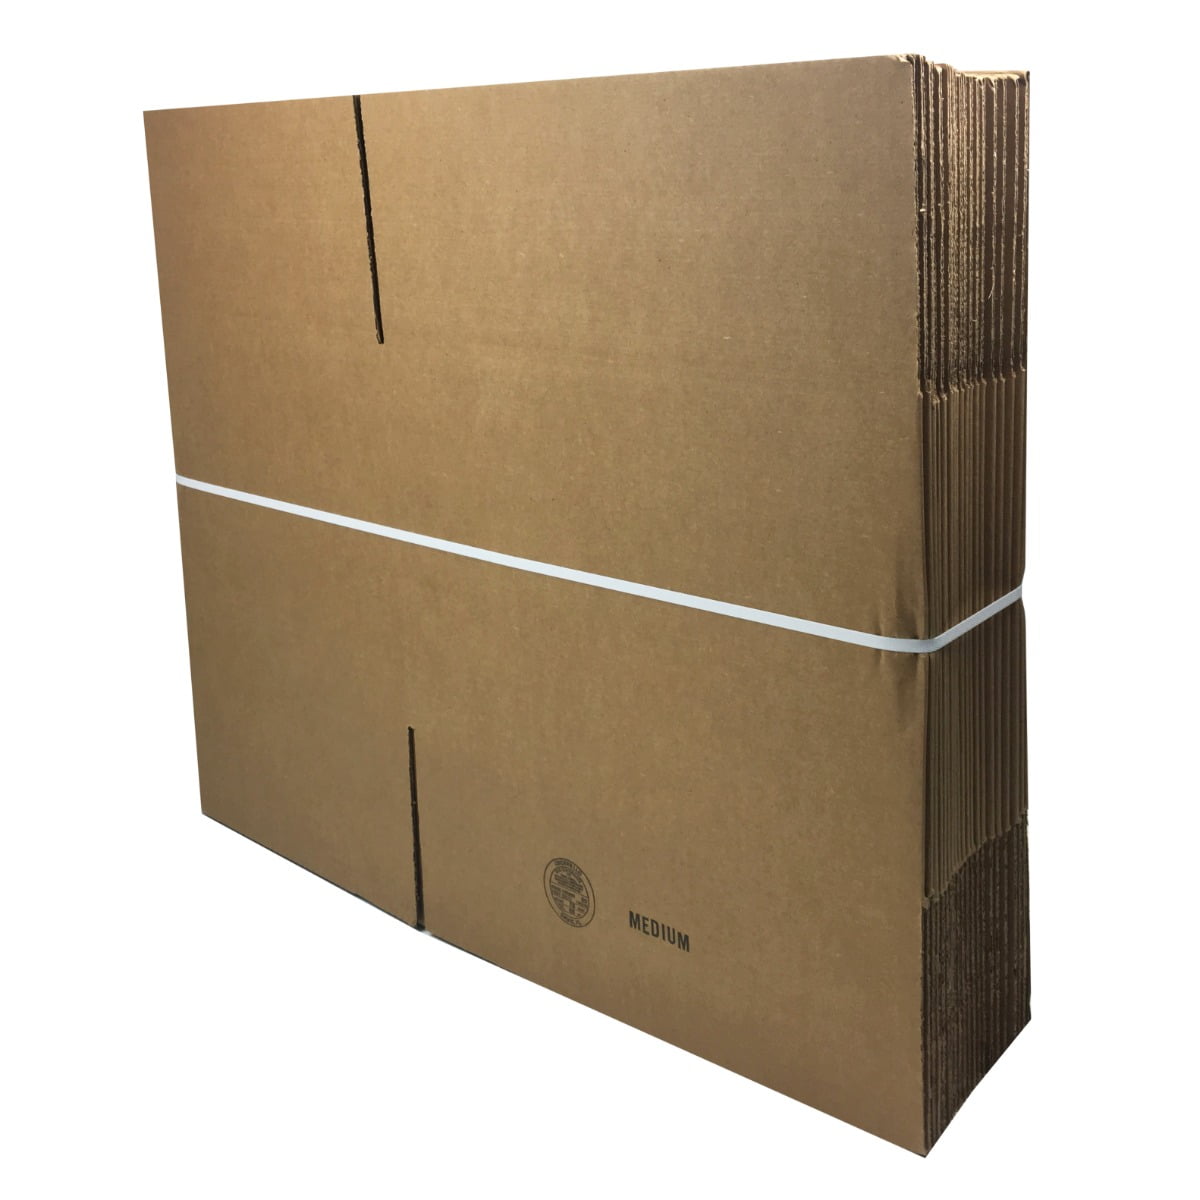 Fоur Расk Mailing Fast and Quick Shipping Moving Made Simple with Our Boxes Best Choice and Moving Boxes. Uboxes Medium Moving Boxes 18 x 14 x 12 Bundle of 20 Transporting 